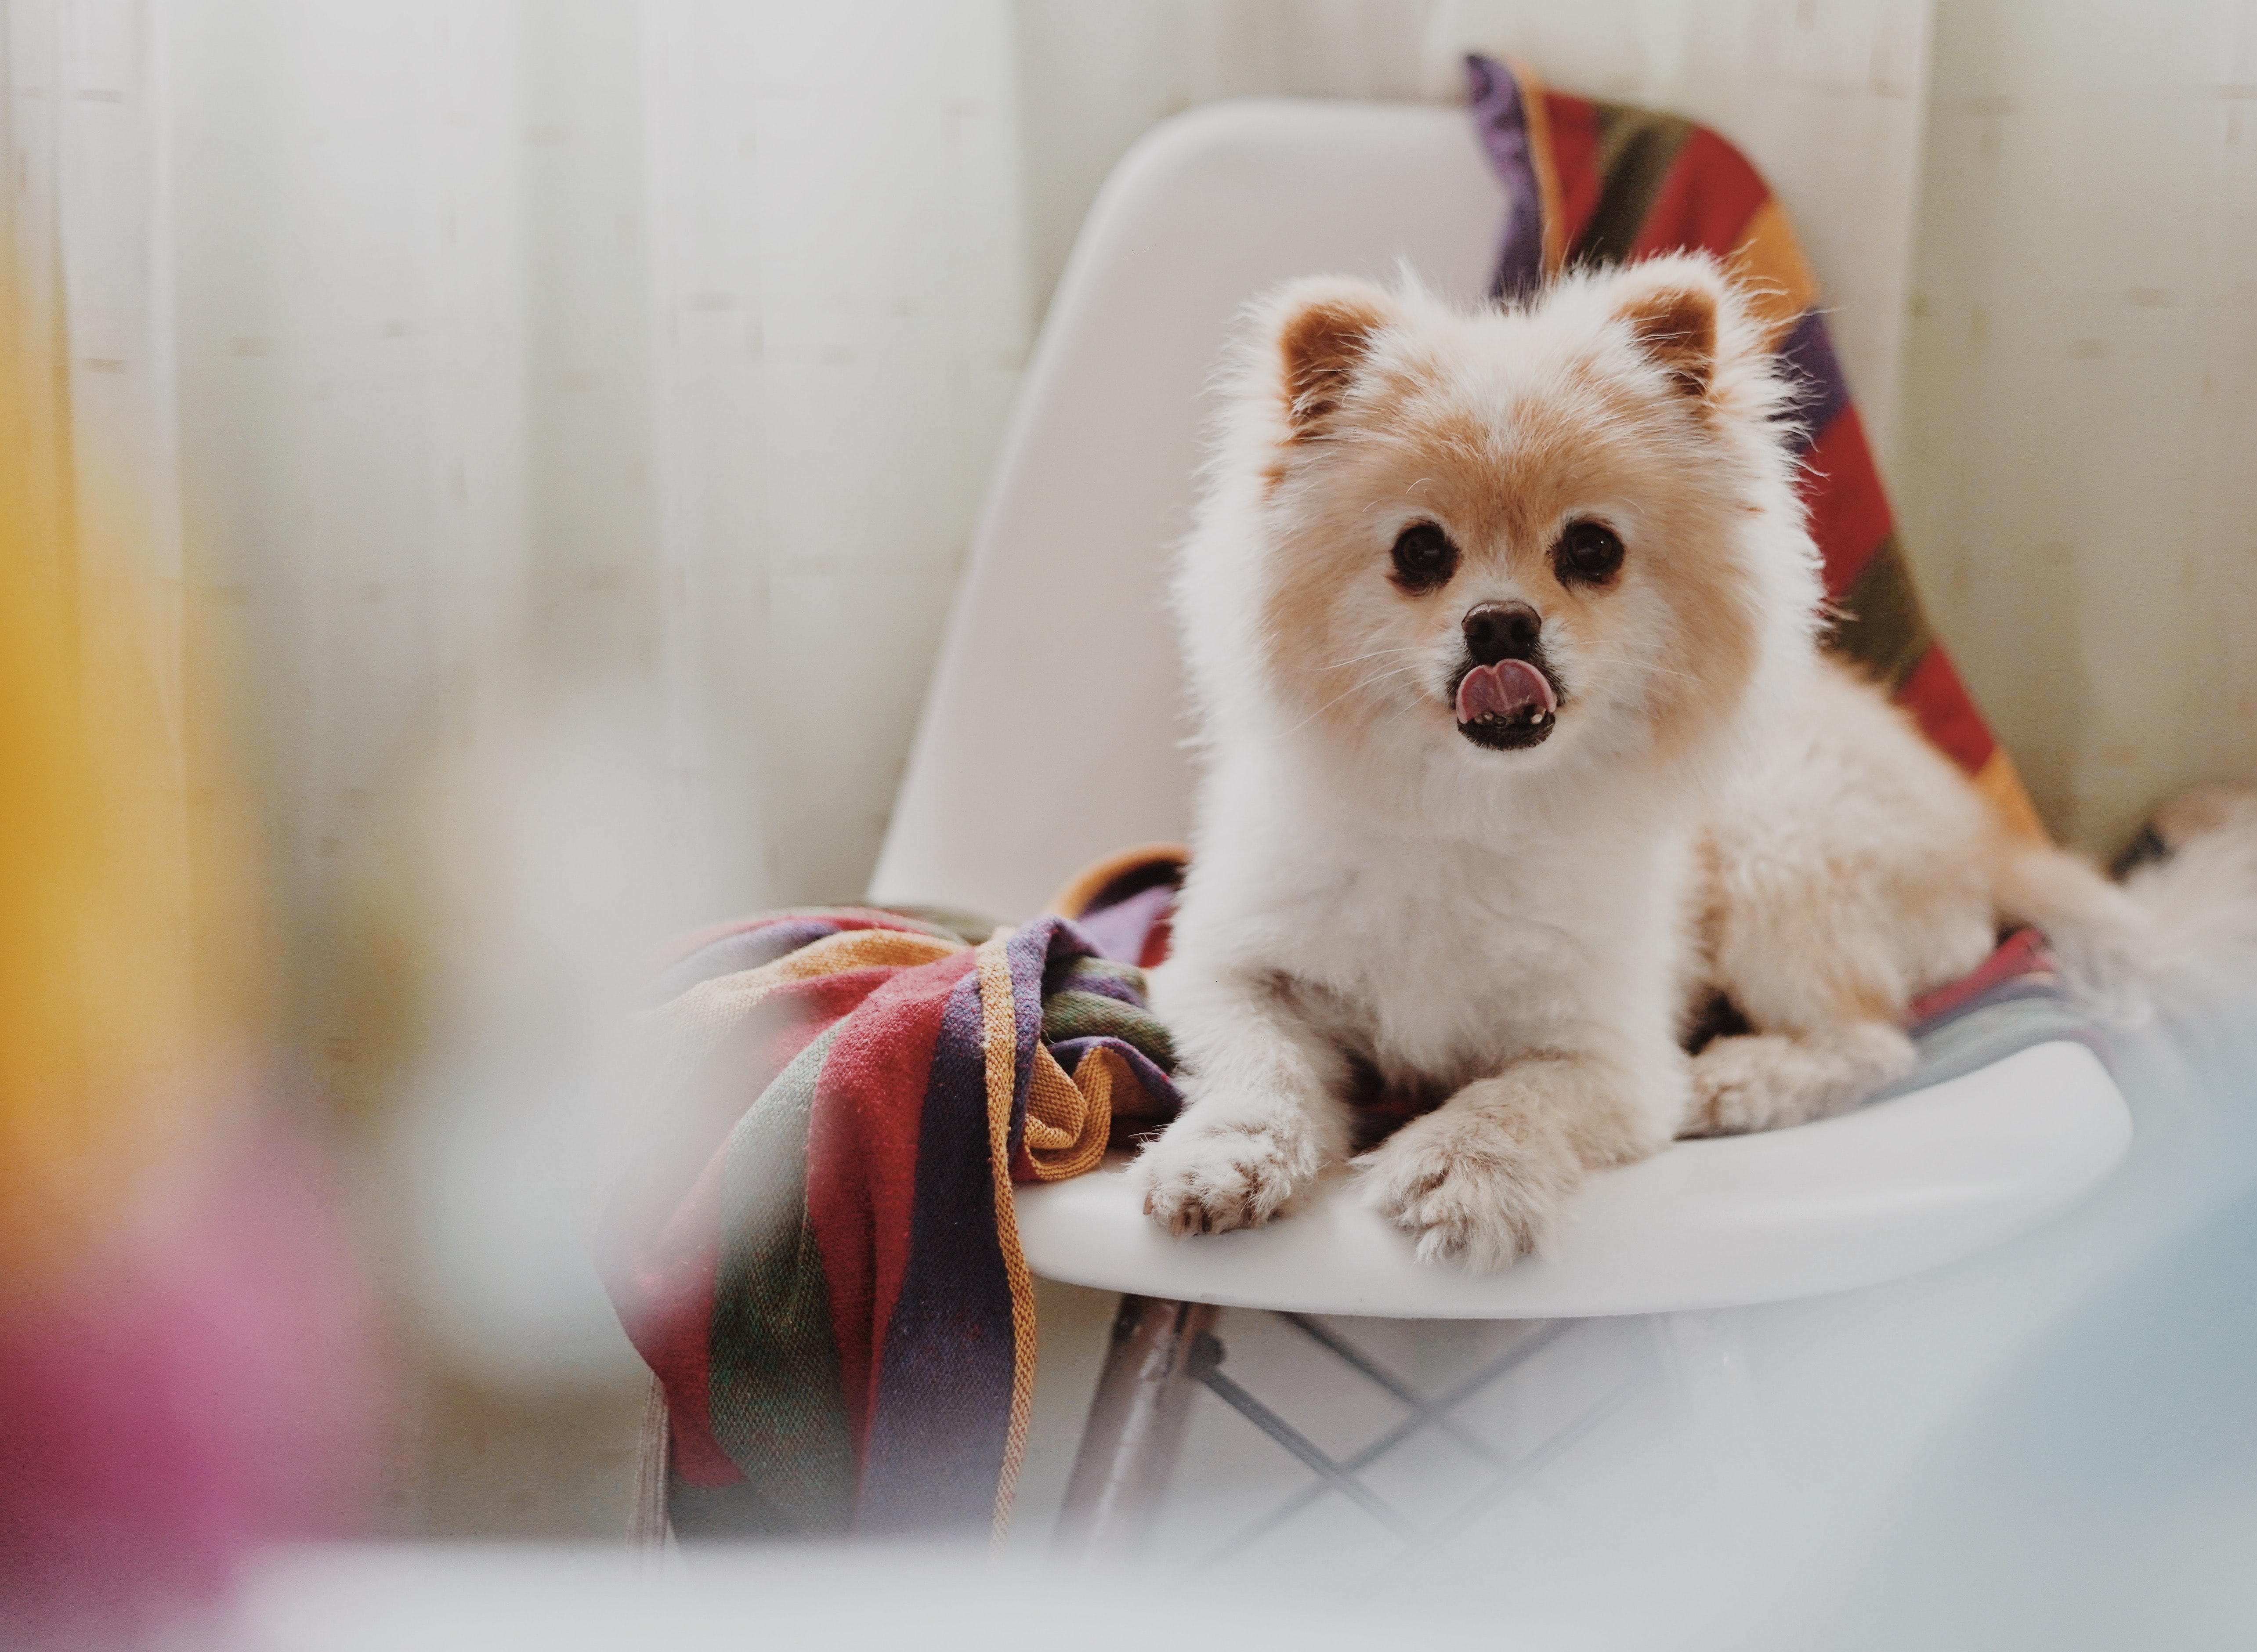 white Pomeranian sitting on chair with its tongue out